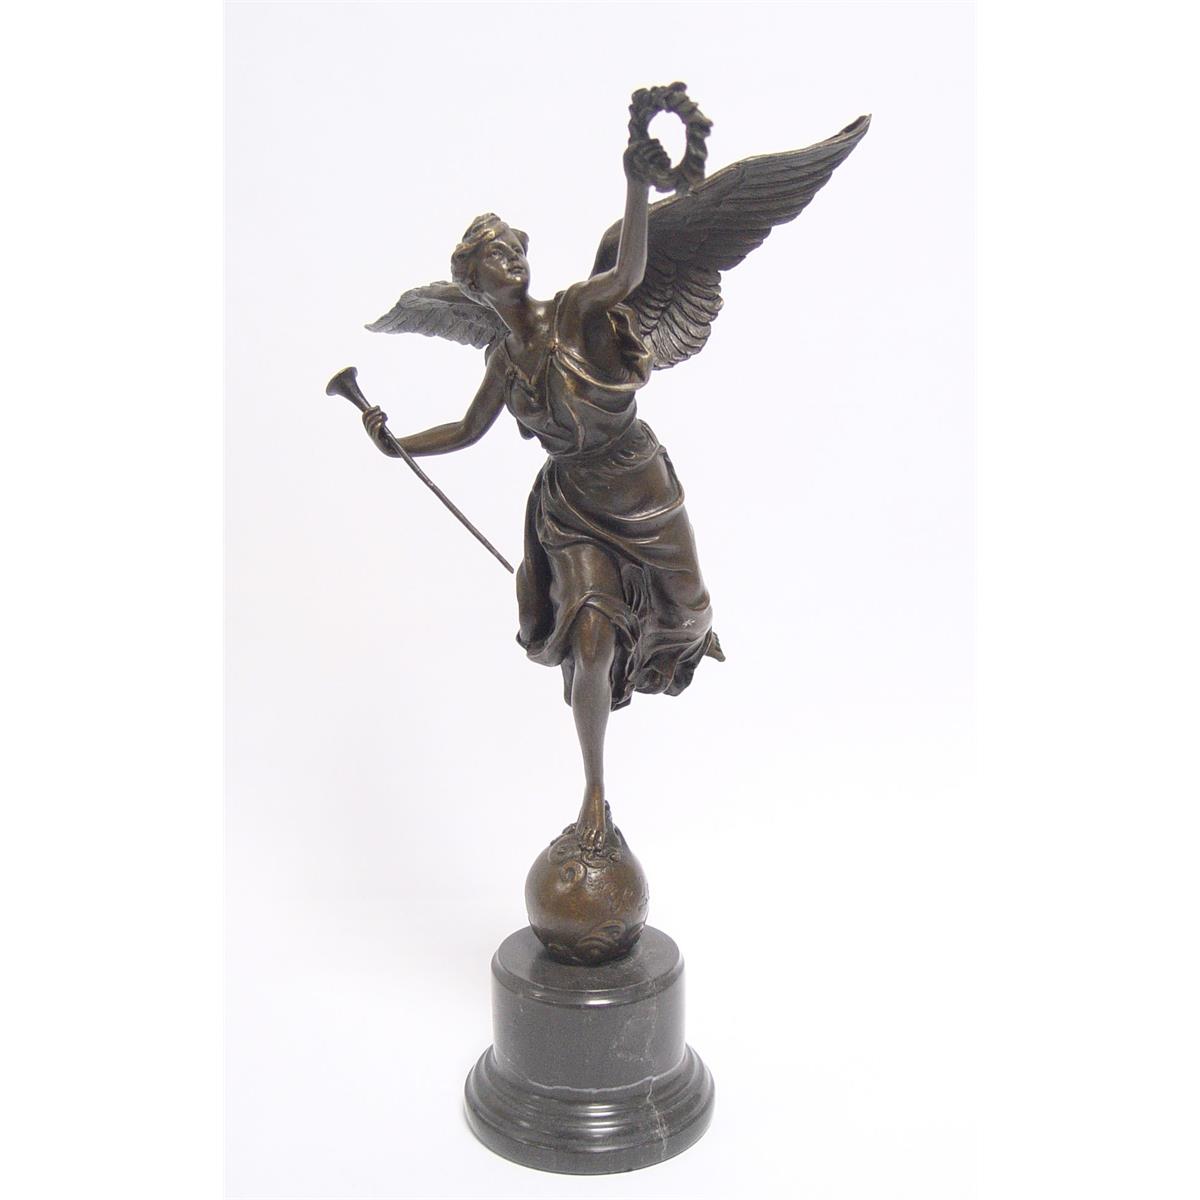 A BRONZE SCULPTURE OF THE WINGED VICTORY